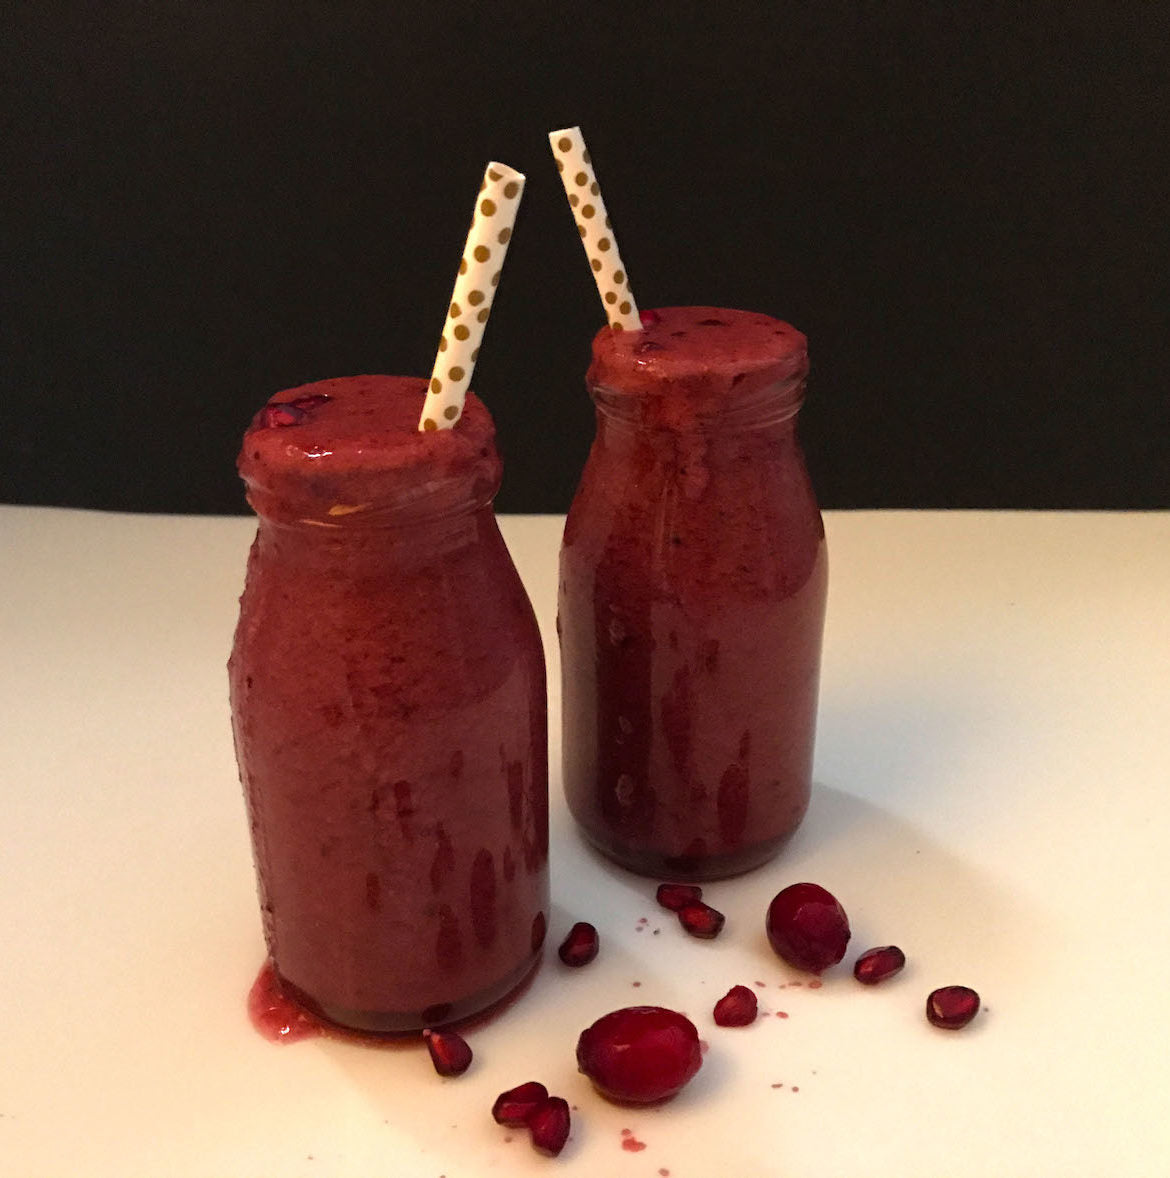 Pear + Berry Smoothie